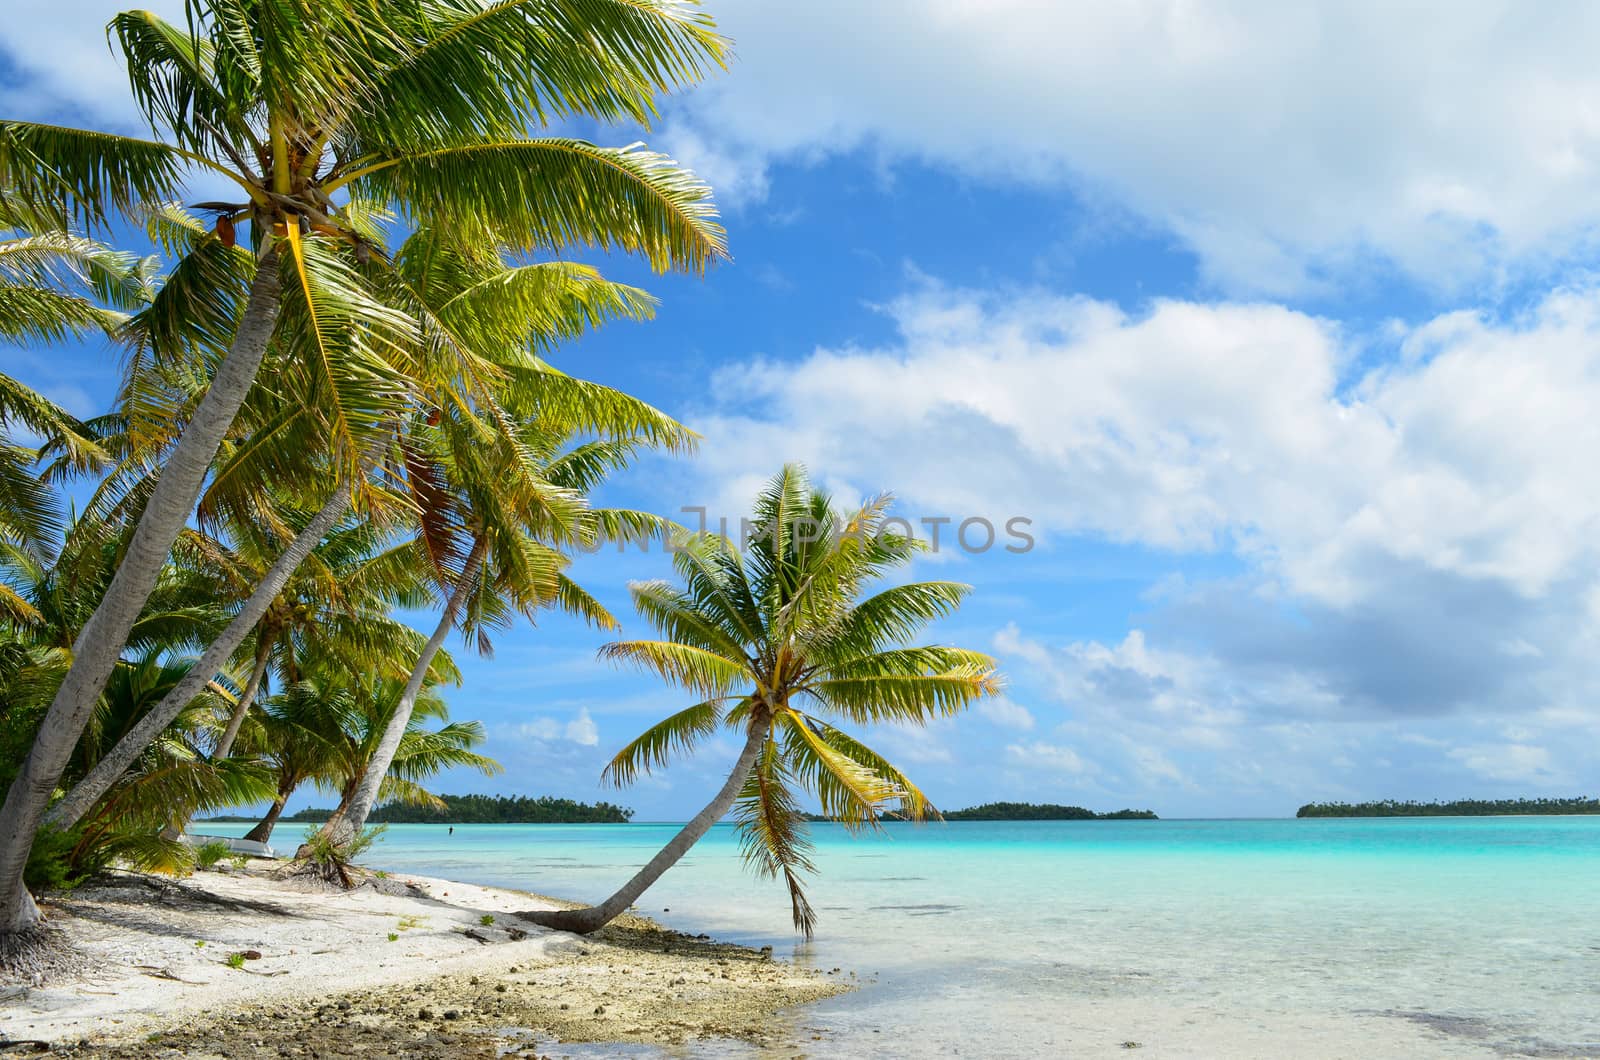 Hanging palm tree on a tropical white sand beach with a blue sea in the lagoon of the Tahiti archipelago French Polynesia.